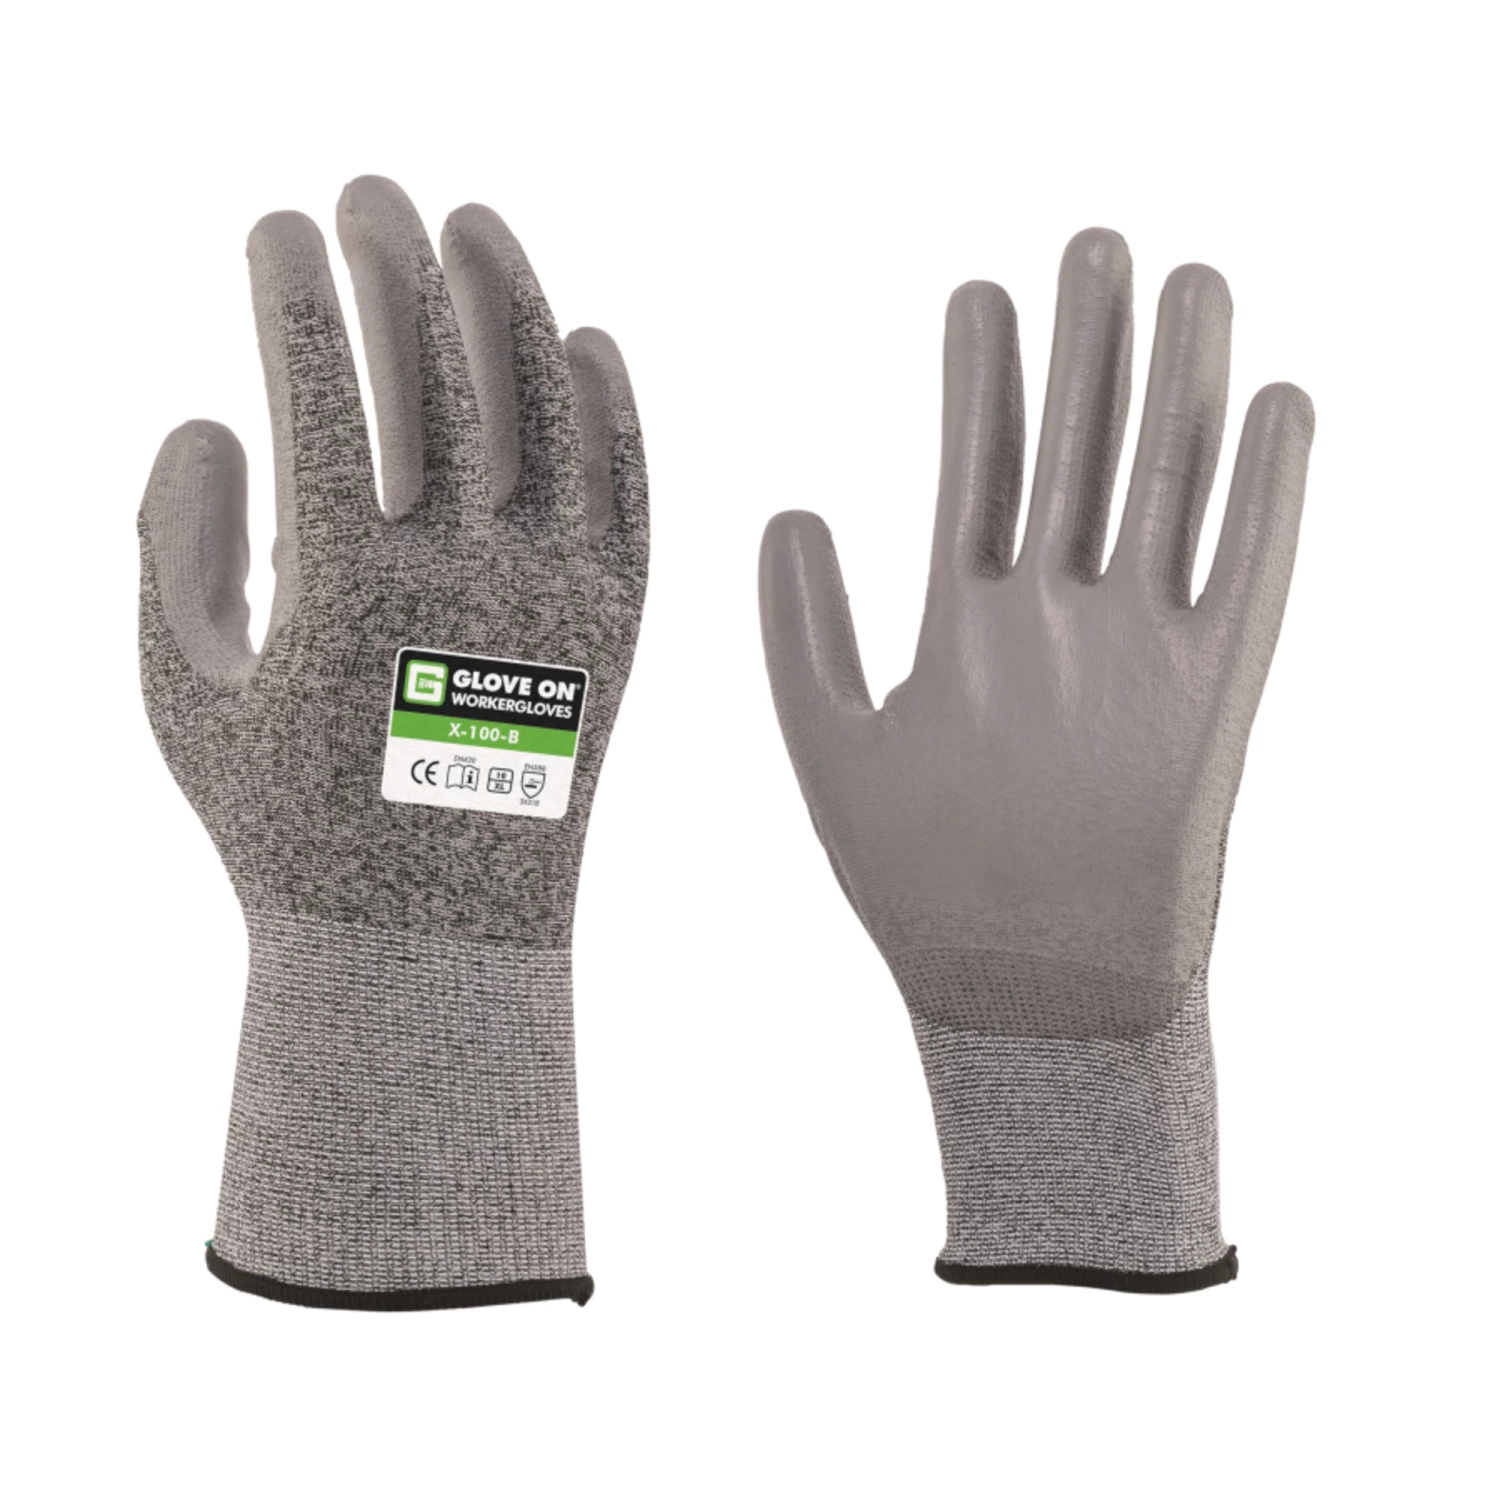 Gant de travail Glove On Protect X 100 B - taille 10-image